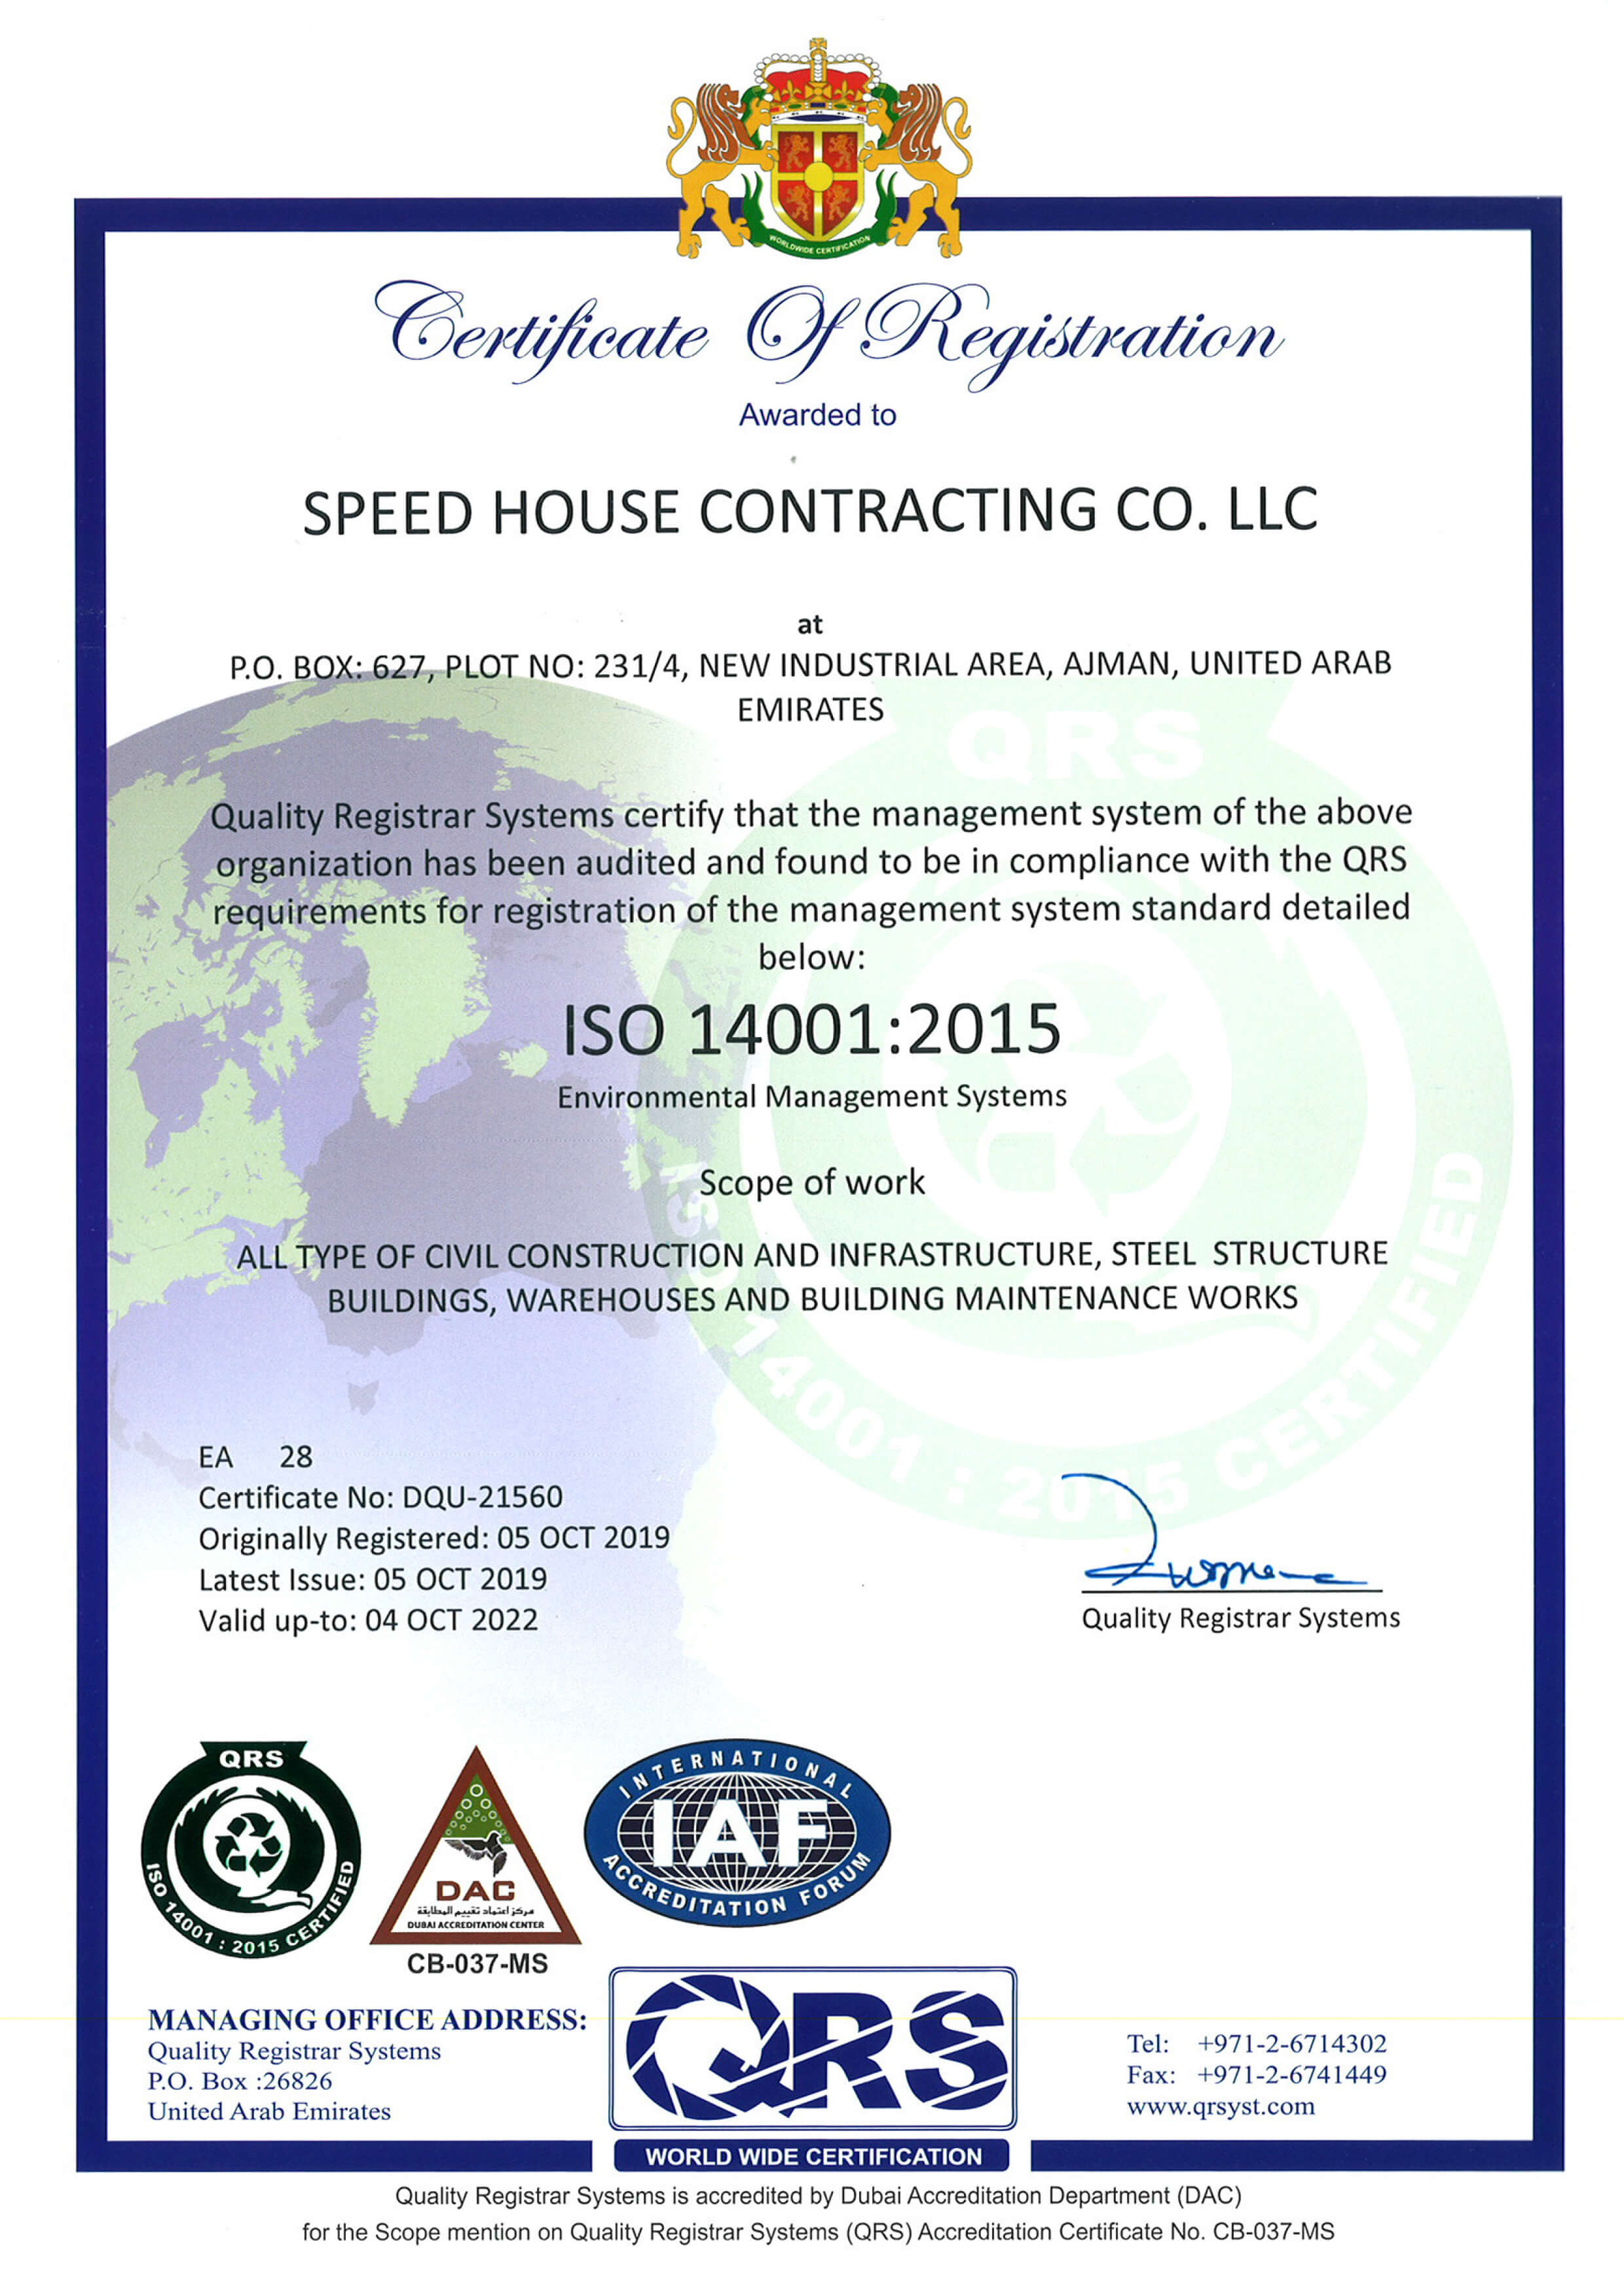 Speed House Group Contracting ISO 14001 Certificate